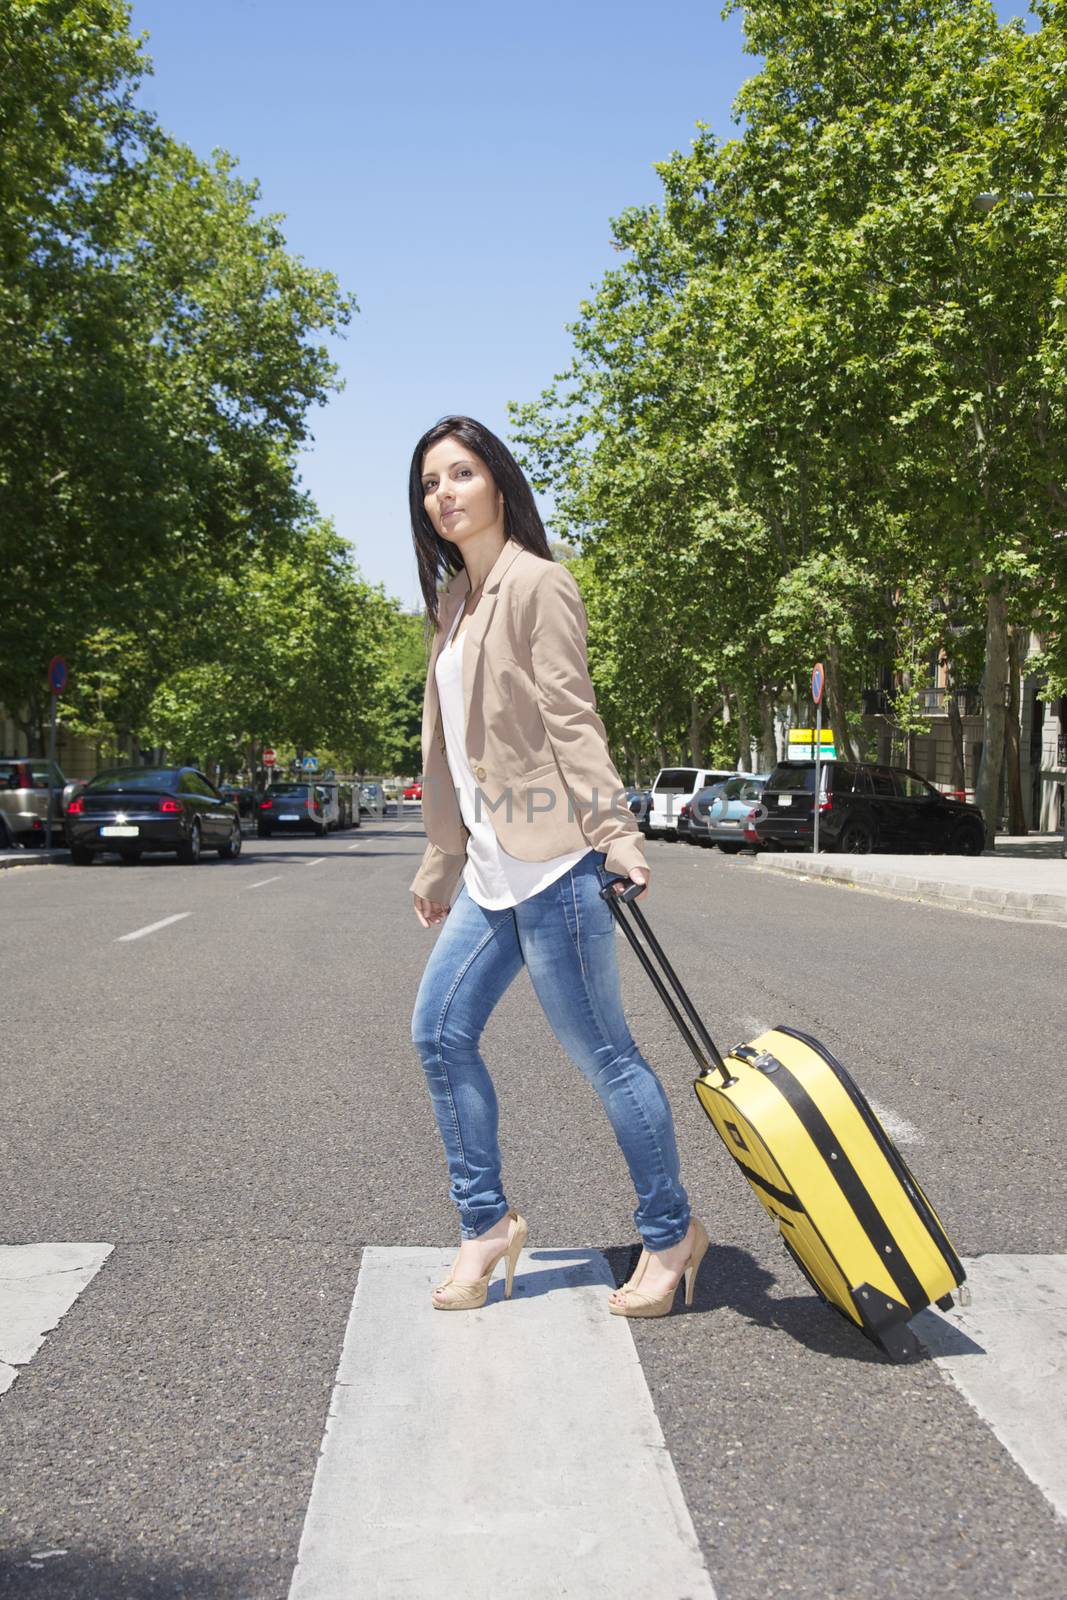 woman pulling suitcase at street in Madrid city Spain
